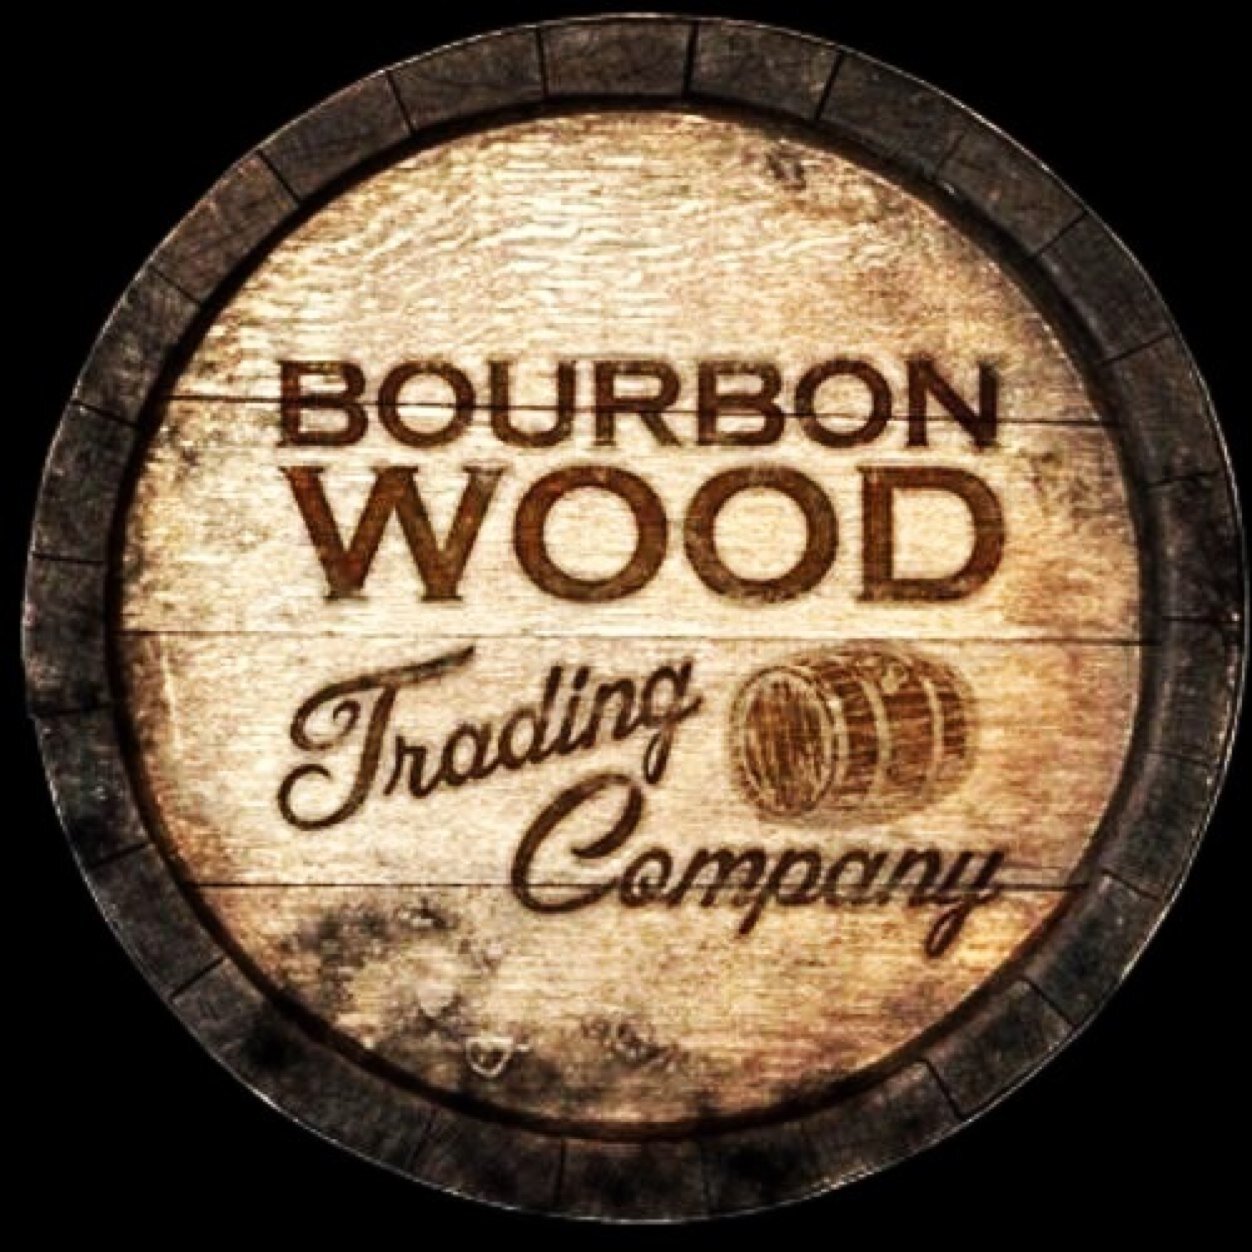 Bourbon Wood Trading Company captures the tradition of bourbon and adds a fresh new style while preserving a celebrated legacy. Live the #bourbonwoodlifestyle